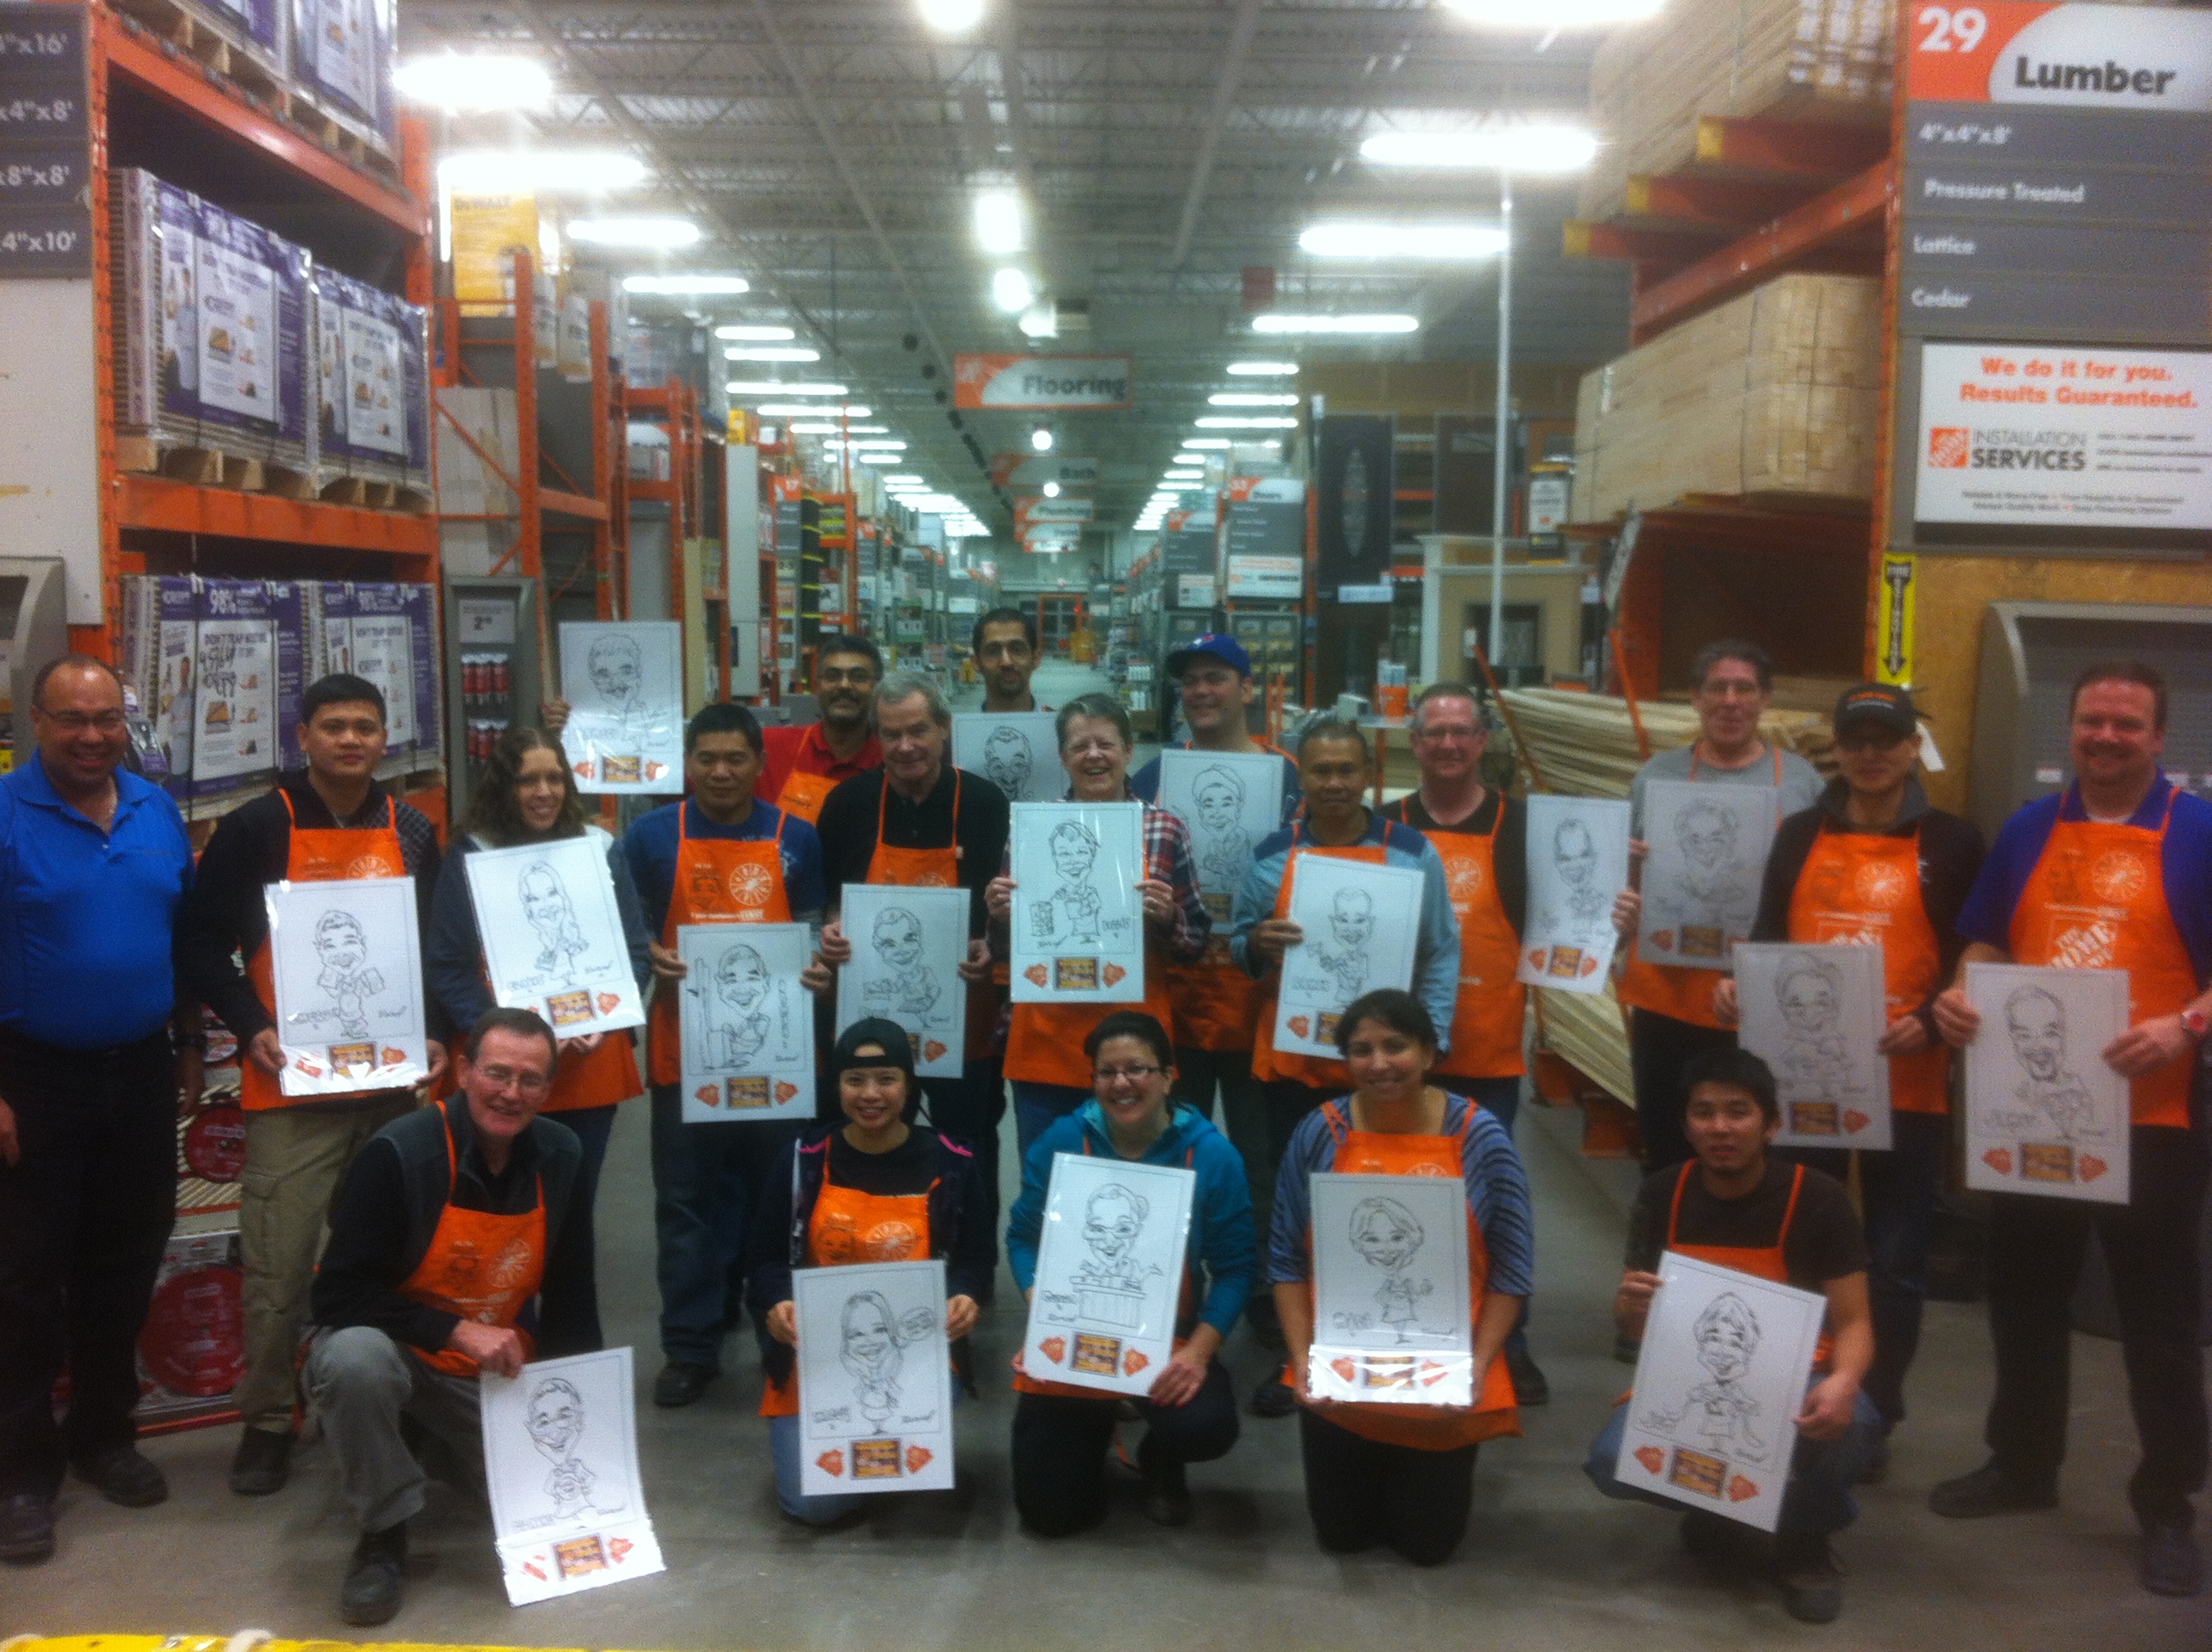 Bruce Outridge Productions Helps Celebrate with Home Depot ...